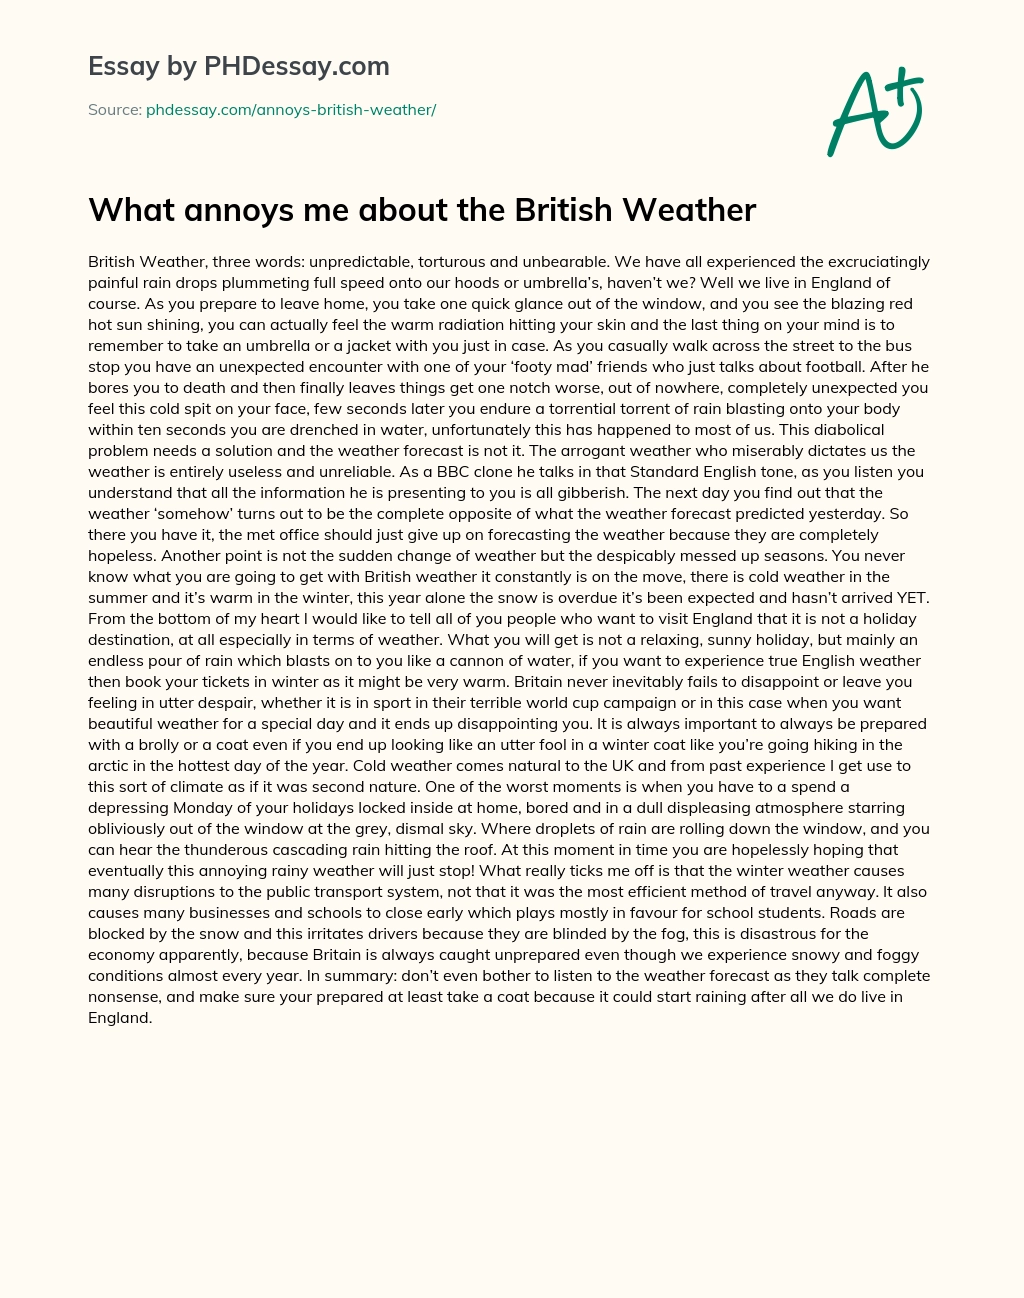 What annoys me about the British Weather essay